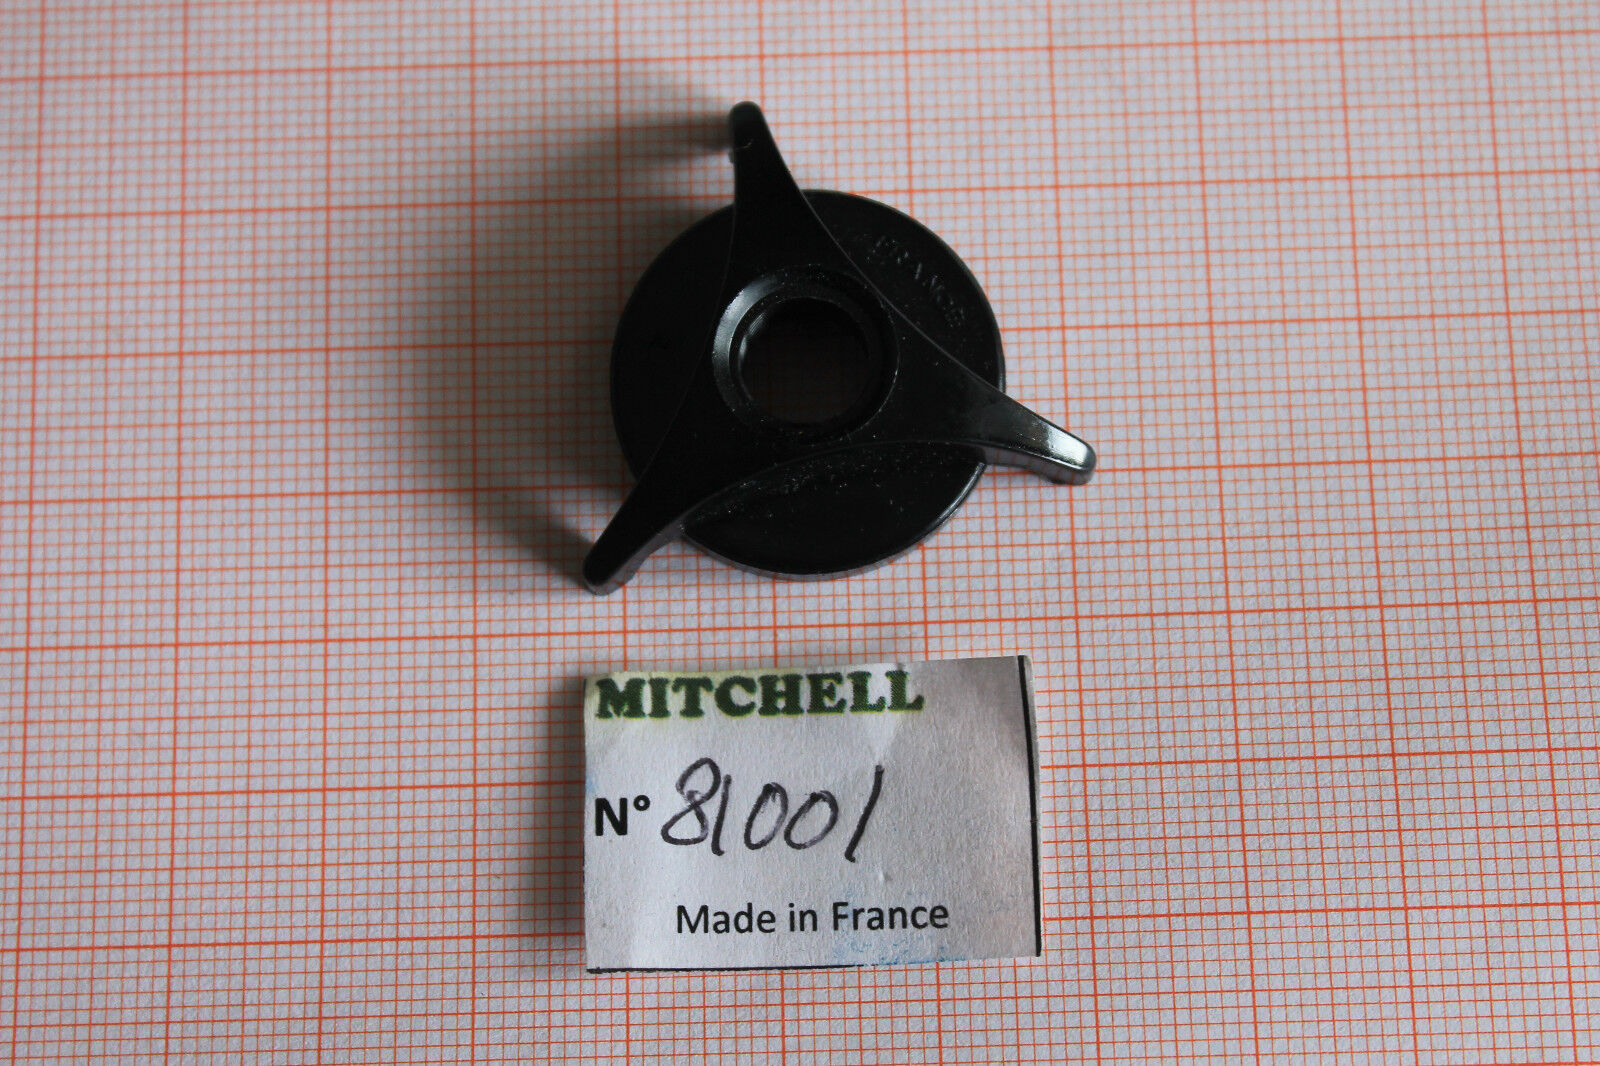 6 Garcia Mitchell 300 Black Drag Knob Fishing Reel Replacement Part 81001  NOS for sale online